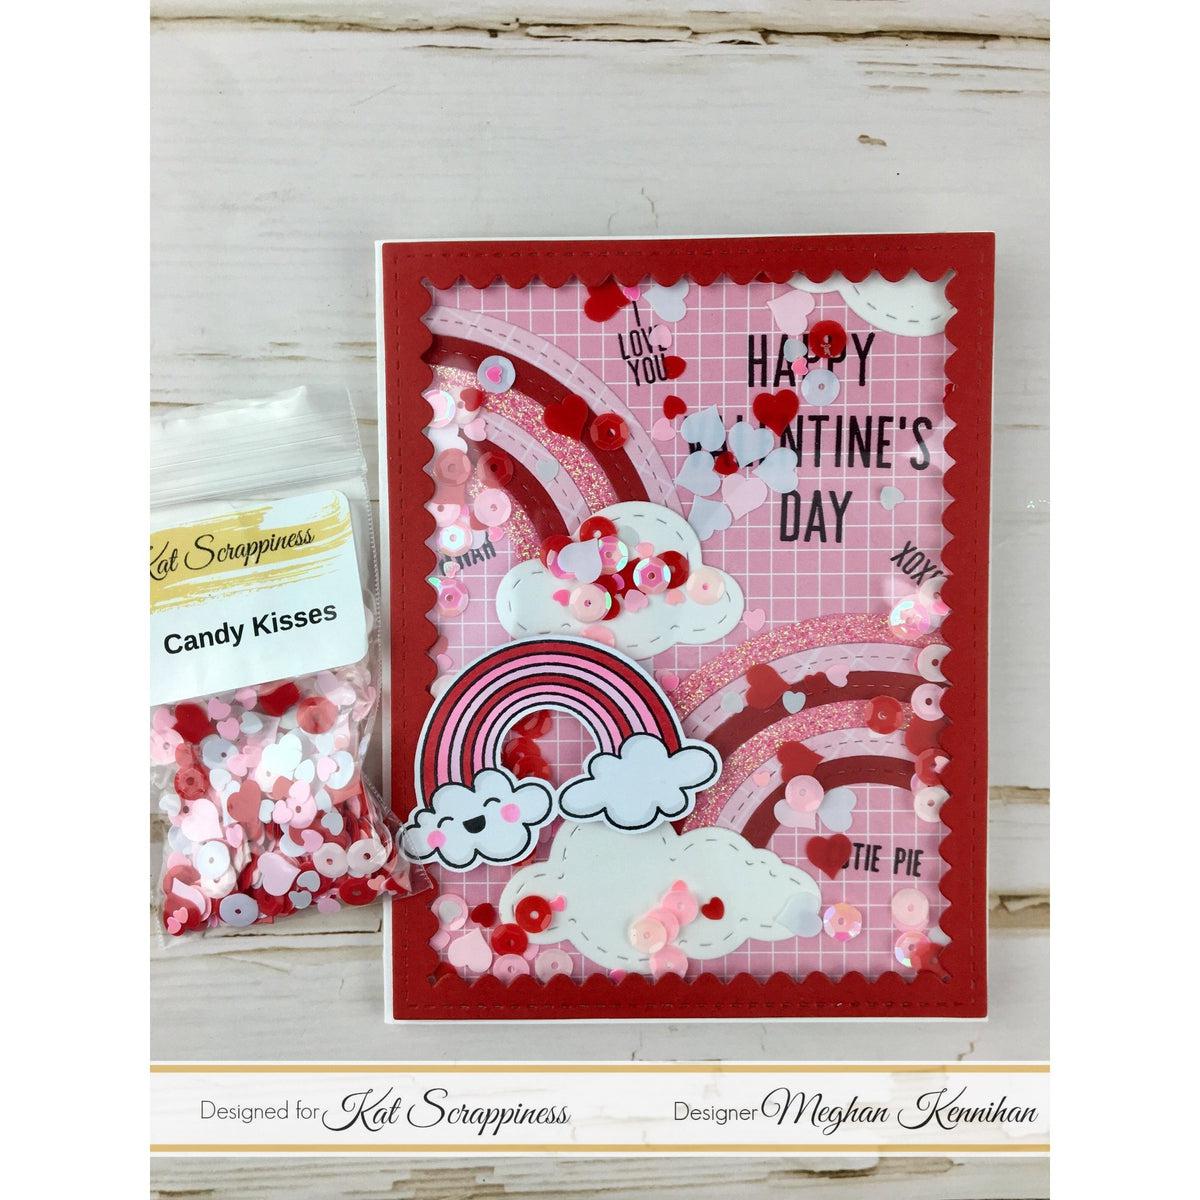 Candy Kisses Valentine Sequin Mix - Kat Scrappiness